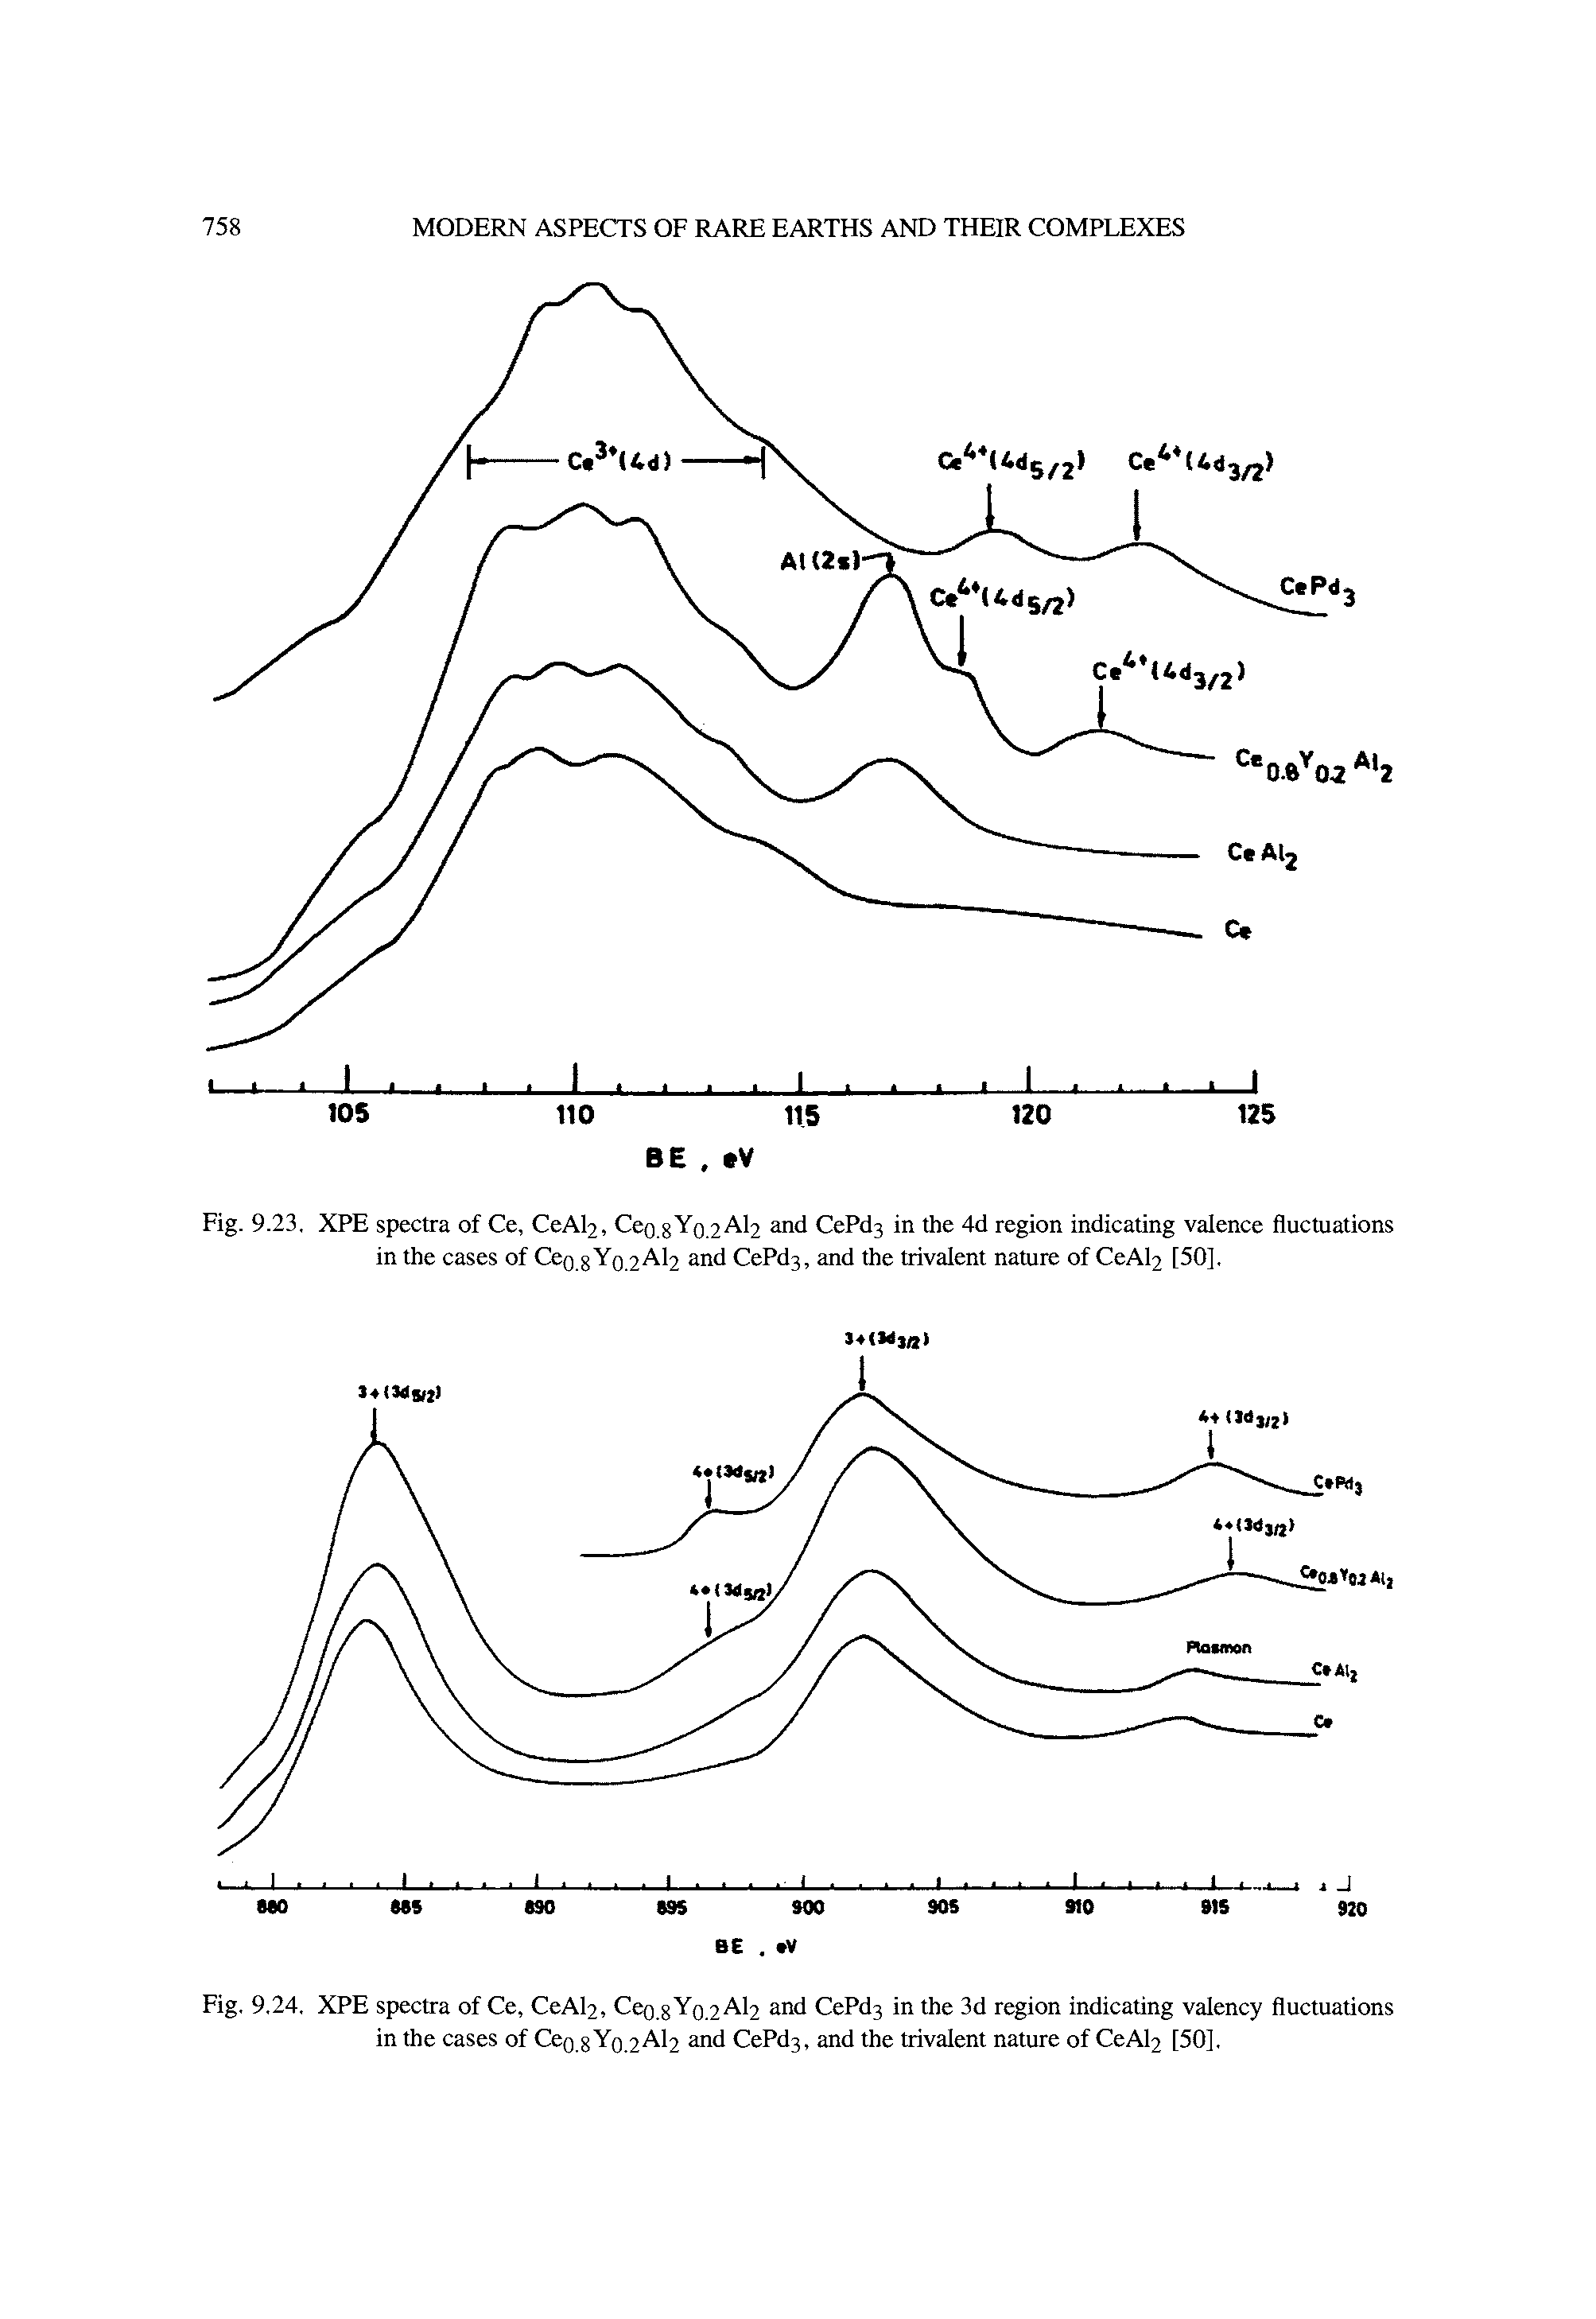 Fig. 9.23, XPE spectra of Ce, CeAl2, Ceo.8Yo.2Al2 and CePd3 in the 4d region indicating valence fluctuations in the cases of Ceo.8Yo.2Al2 and CePd3, and the trivalent nature of CeAl2 [50],...